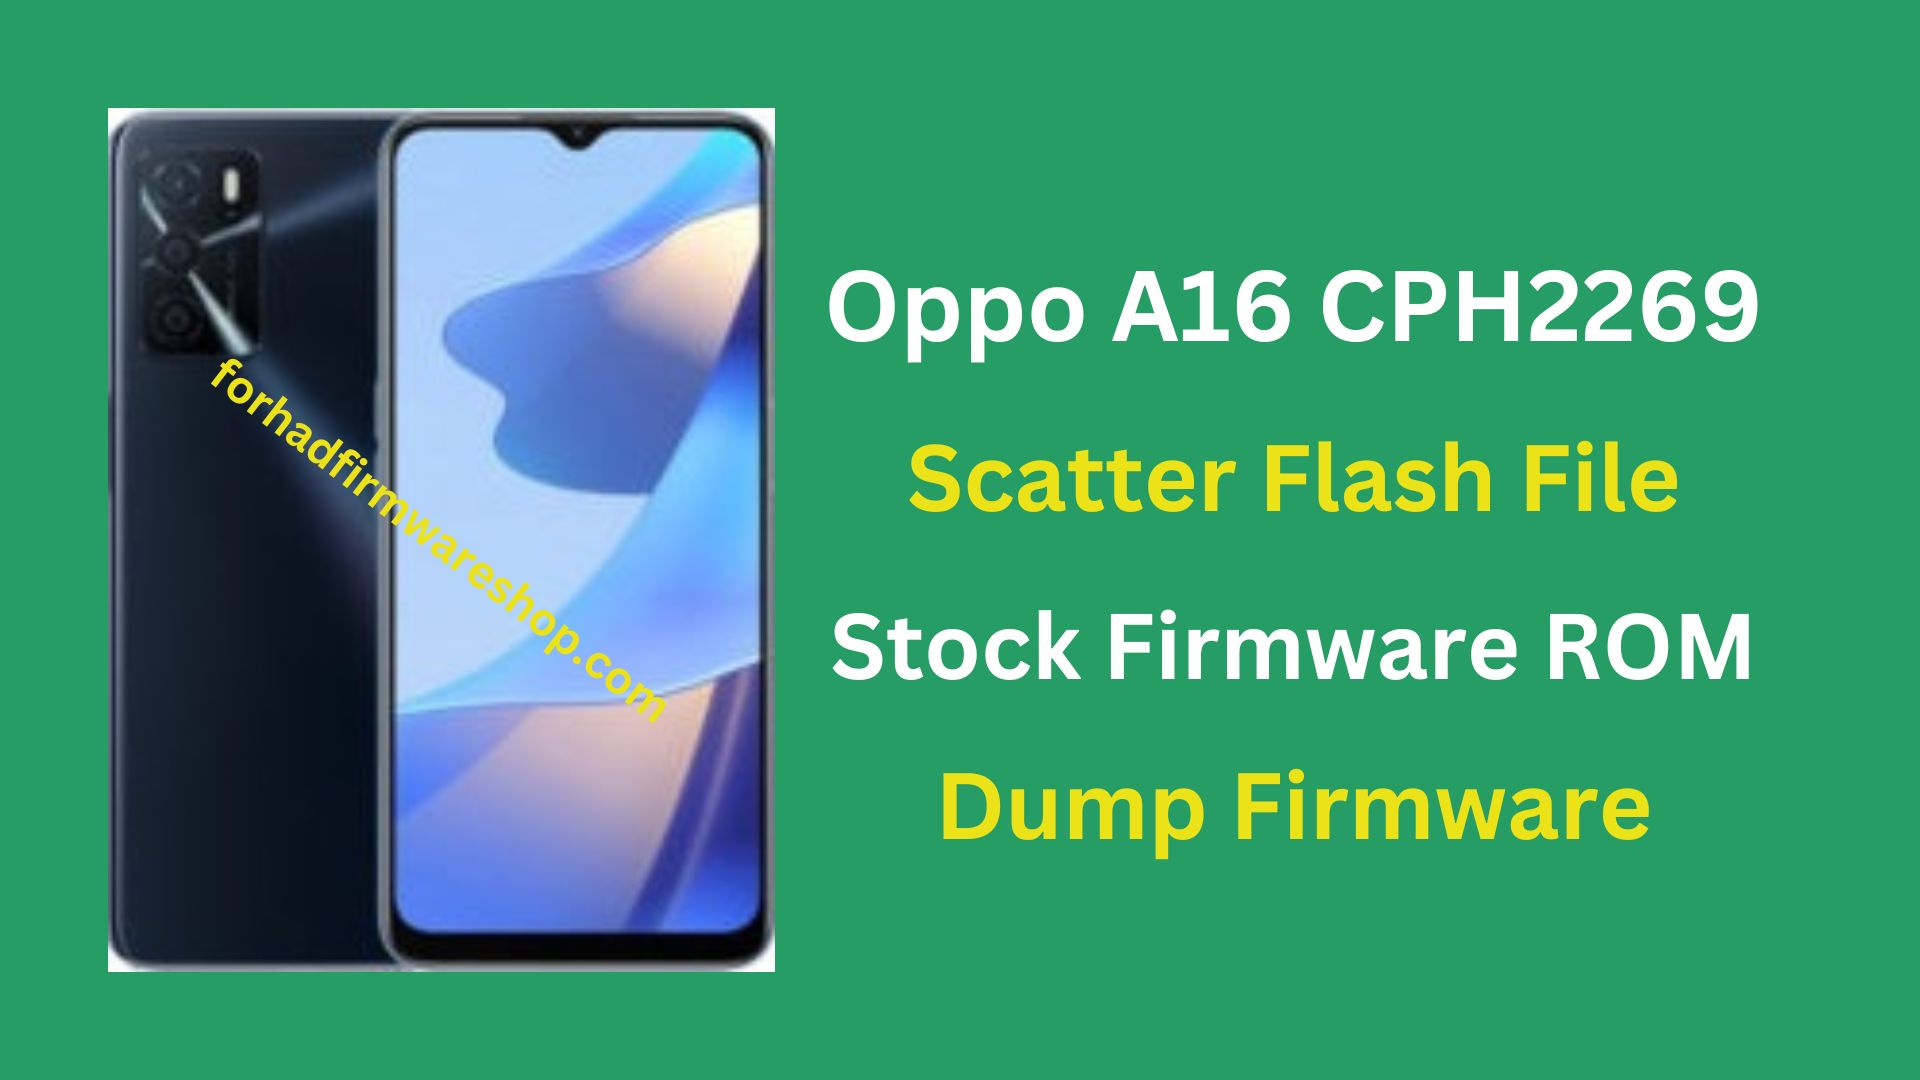 Oppo A16 CPH2269 Scatter Stock Firmware ROM (Flash File)